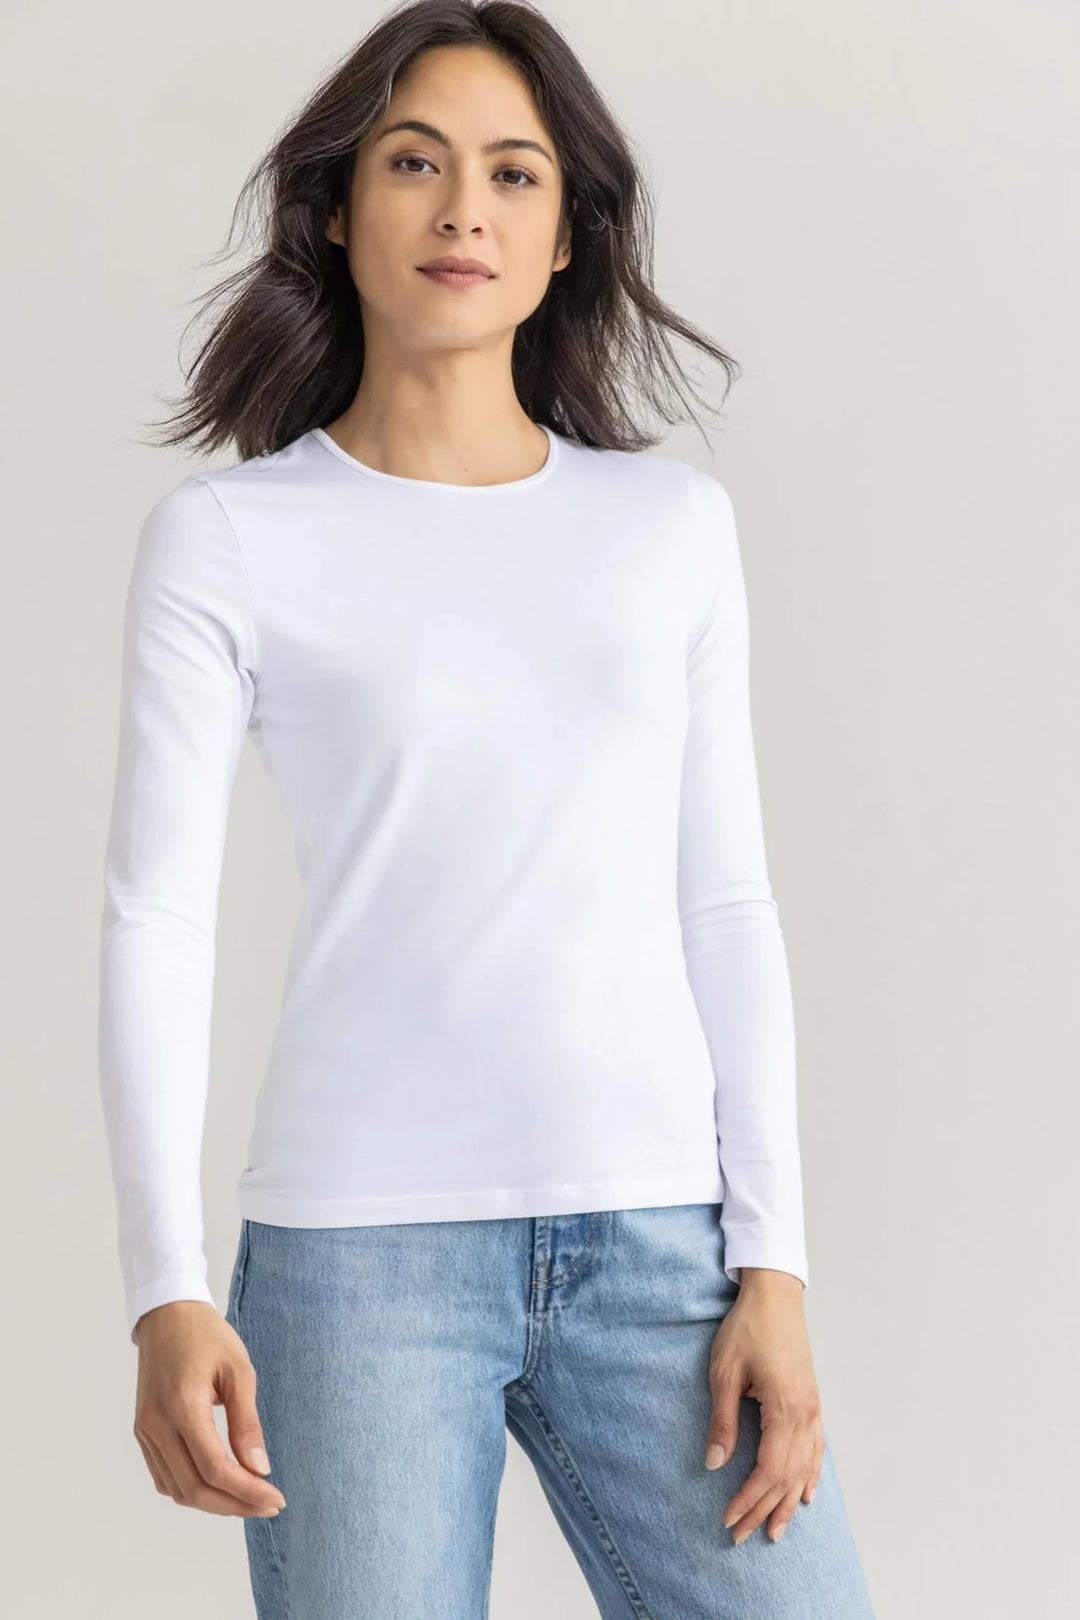 Long Sleeve Crew Tee in White - Madison's Niche 